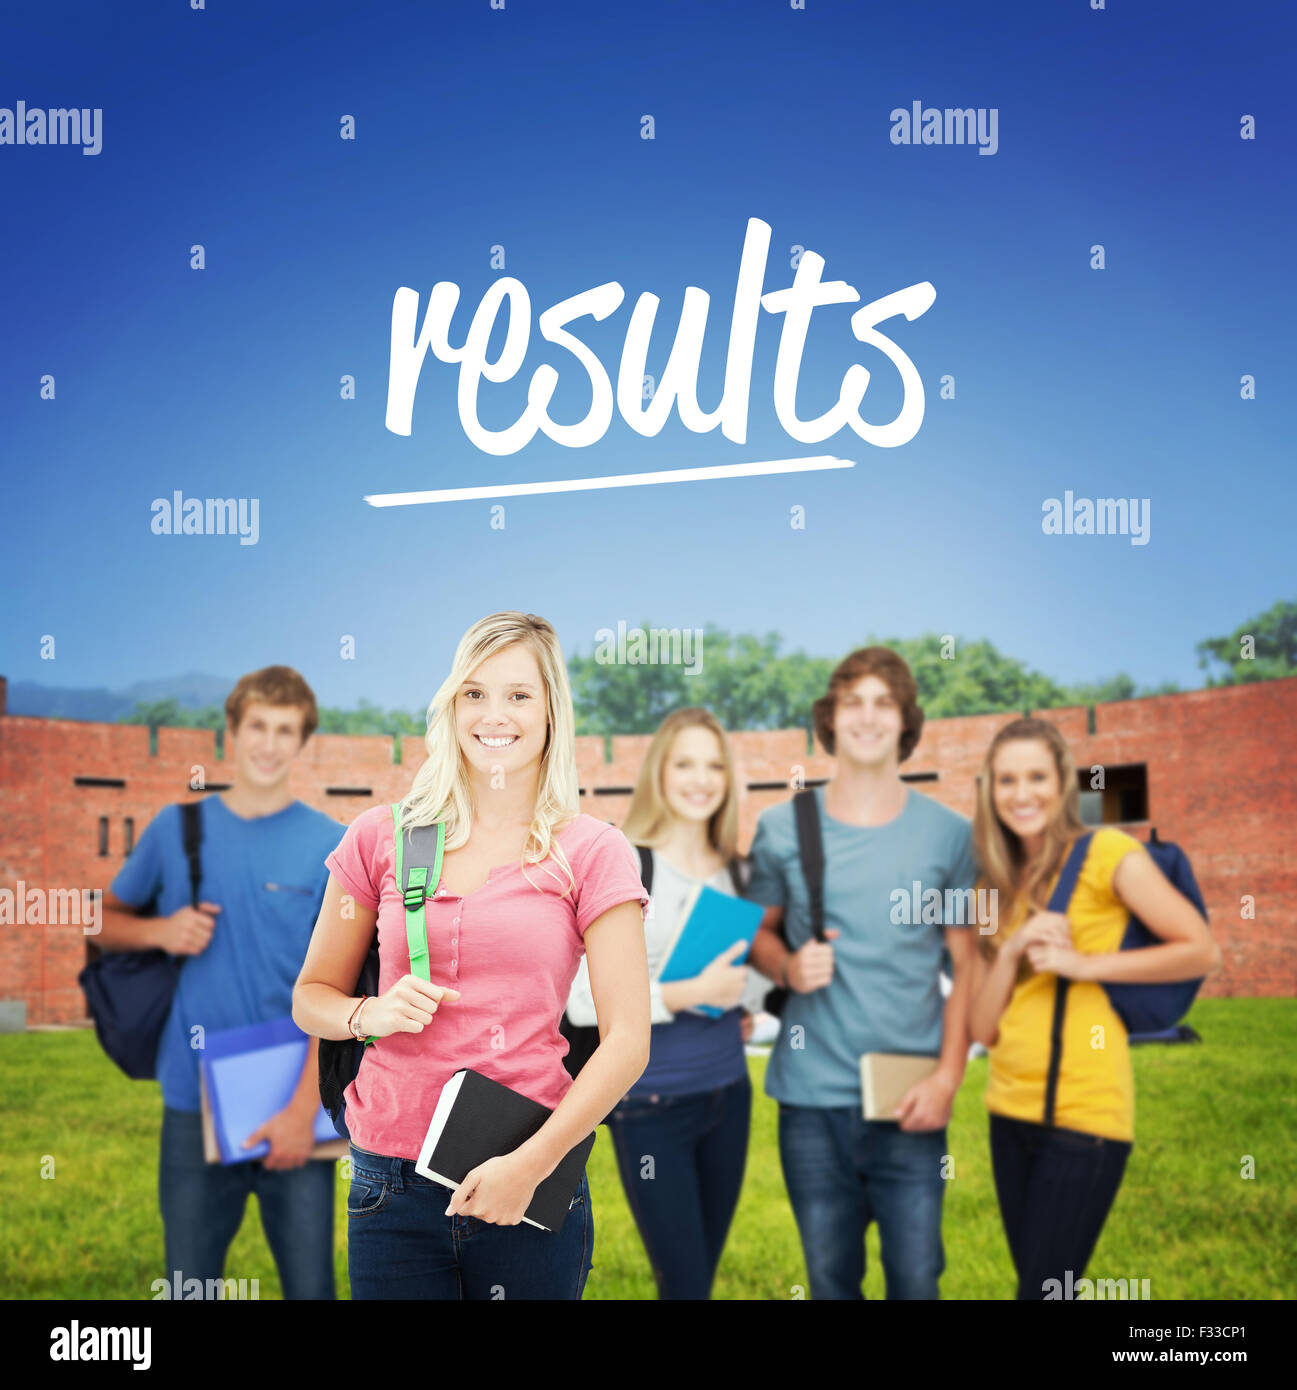 Results against students using laptop in lawn against college building Stock Photo